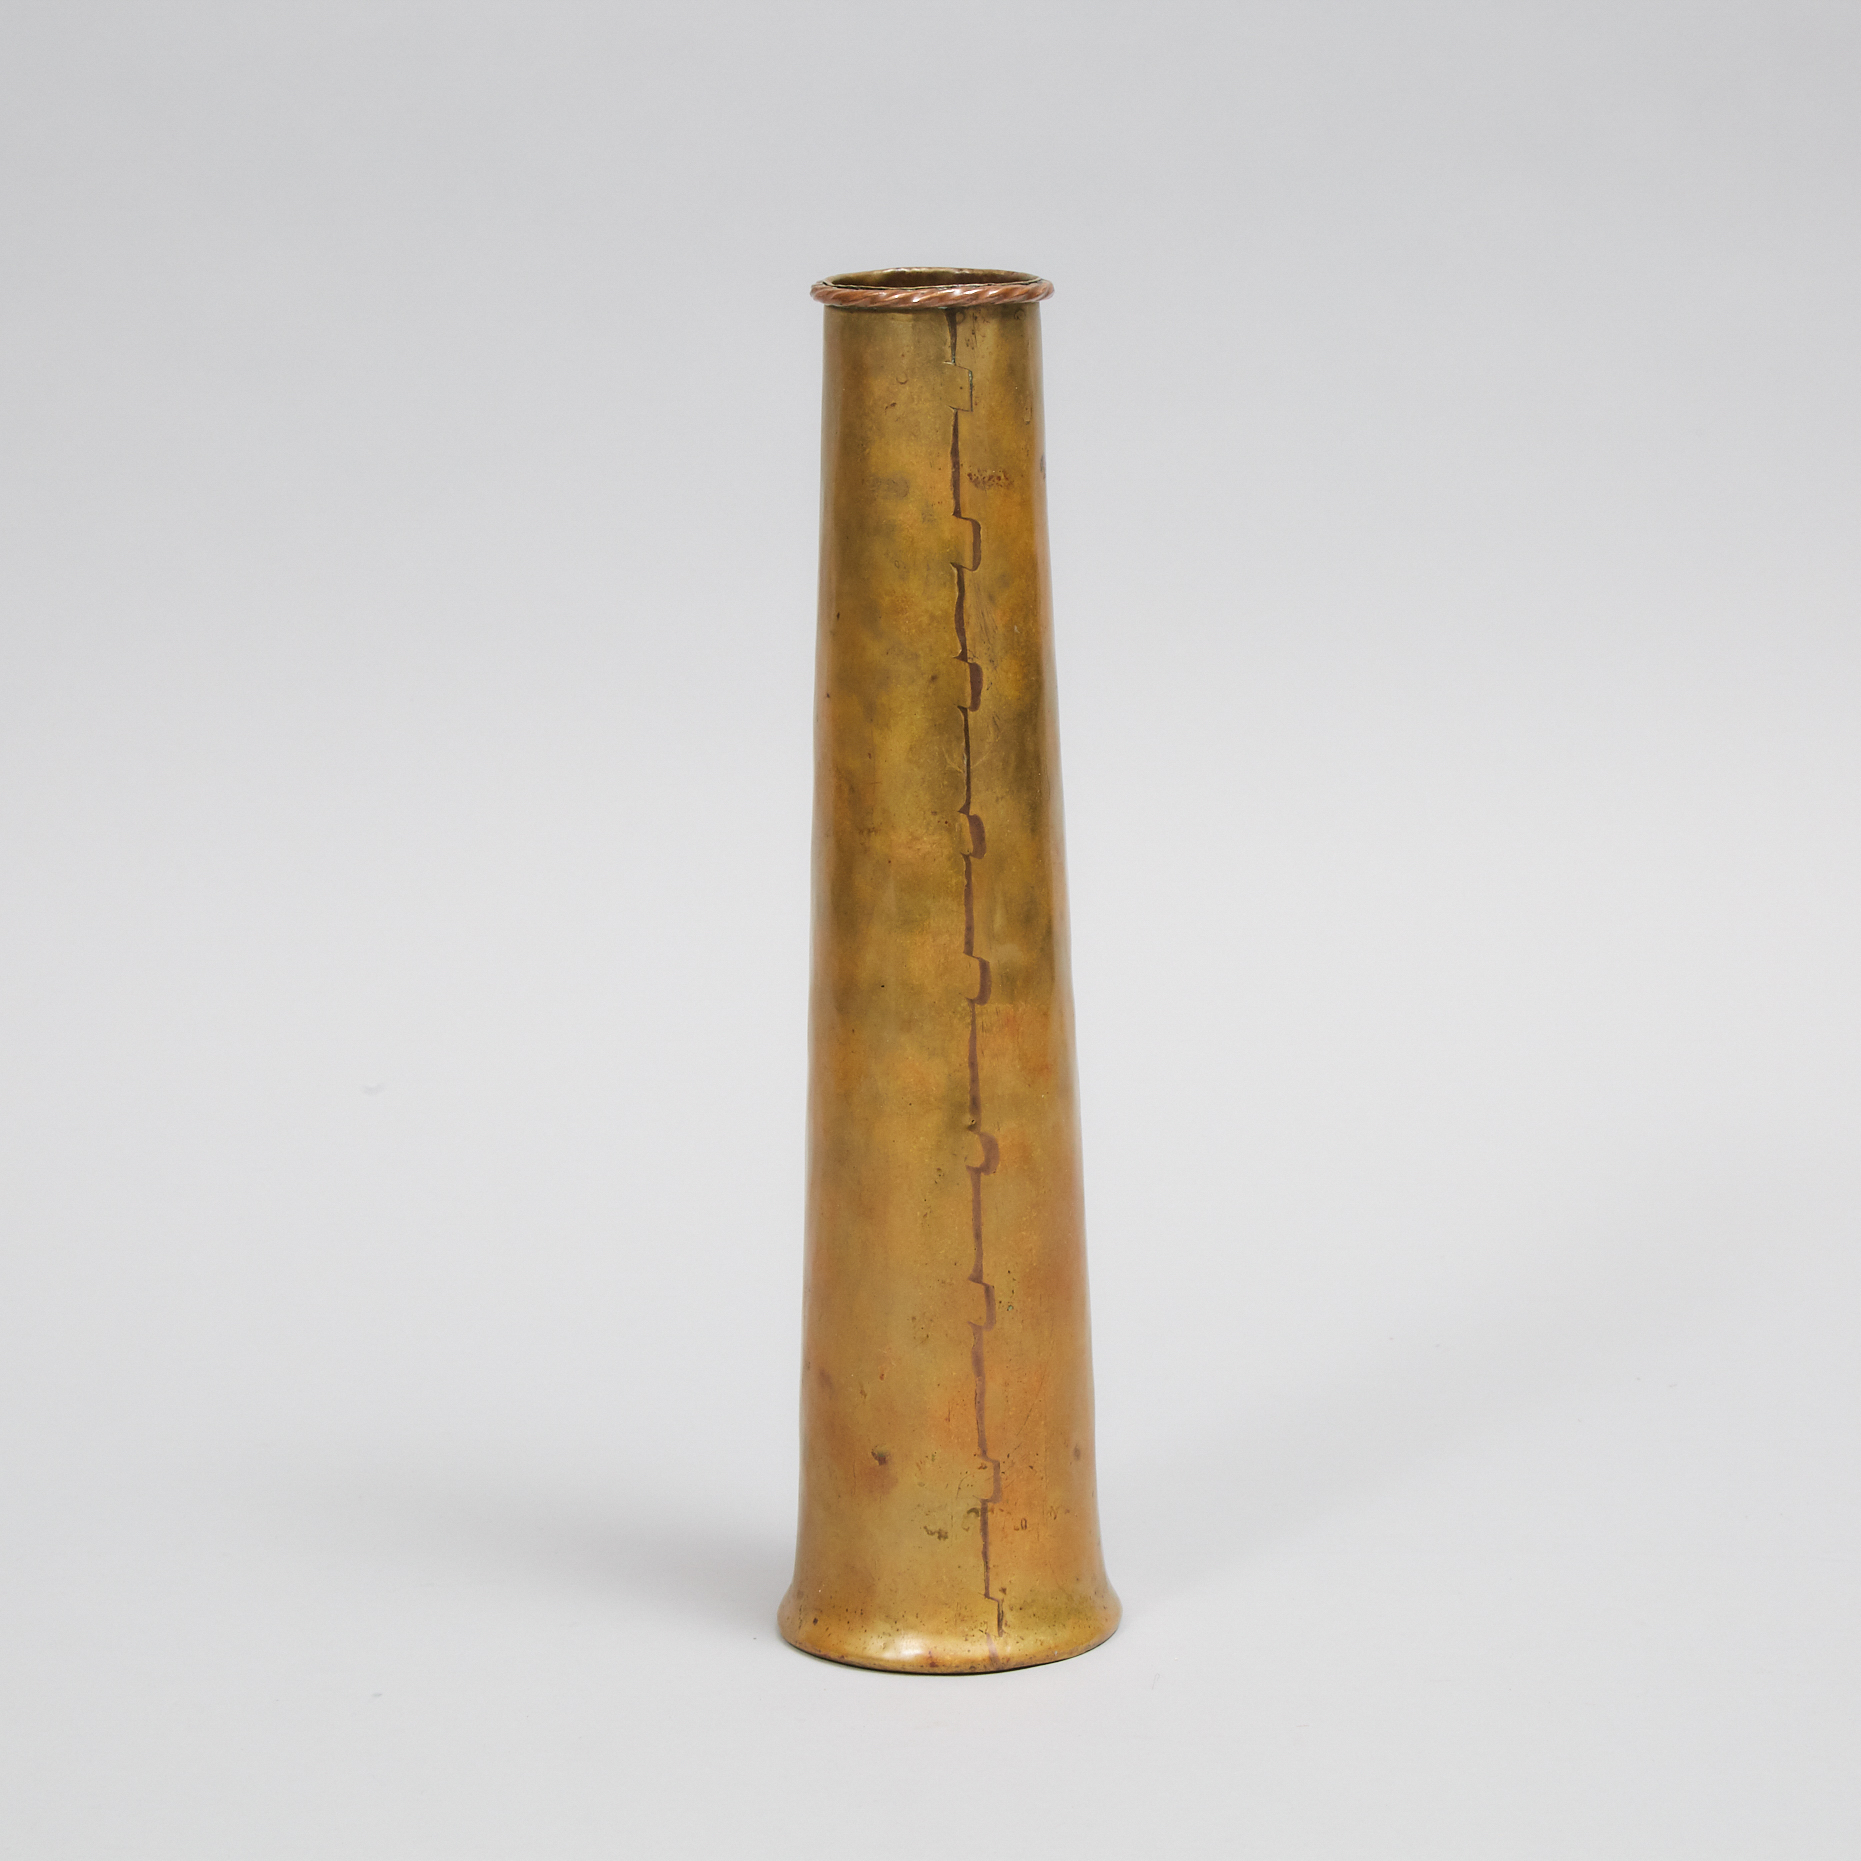 Paul Beau (Canadian, 1871-1941) Tall Copper Mounted Brass Cone Vase, Montreal, early 20th century